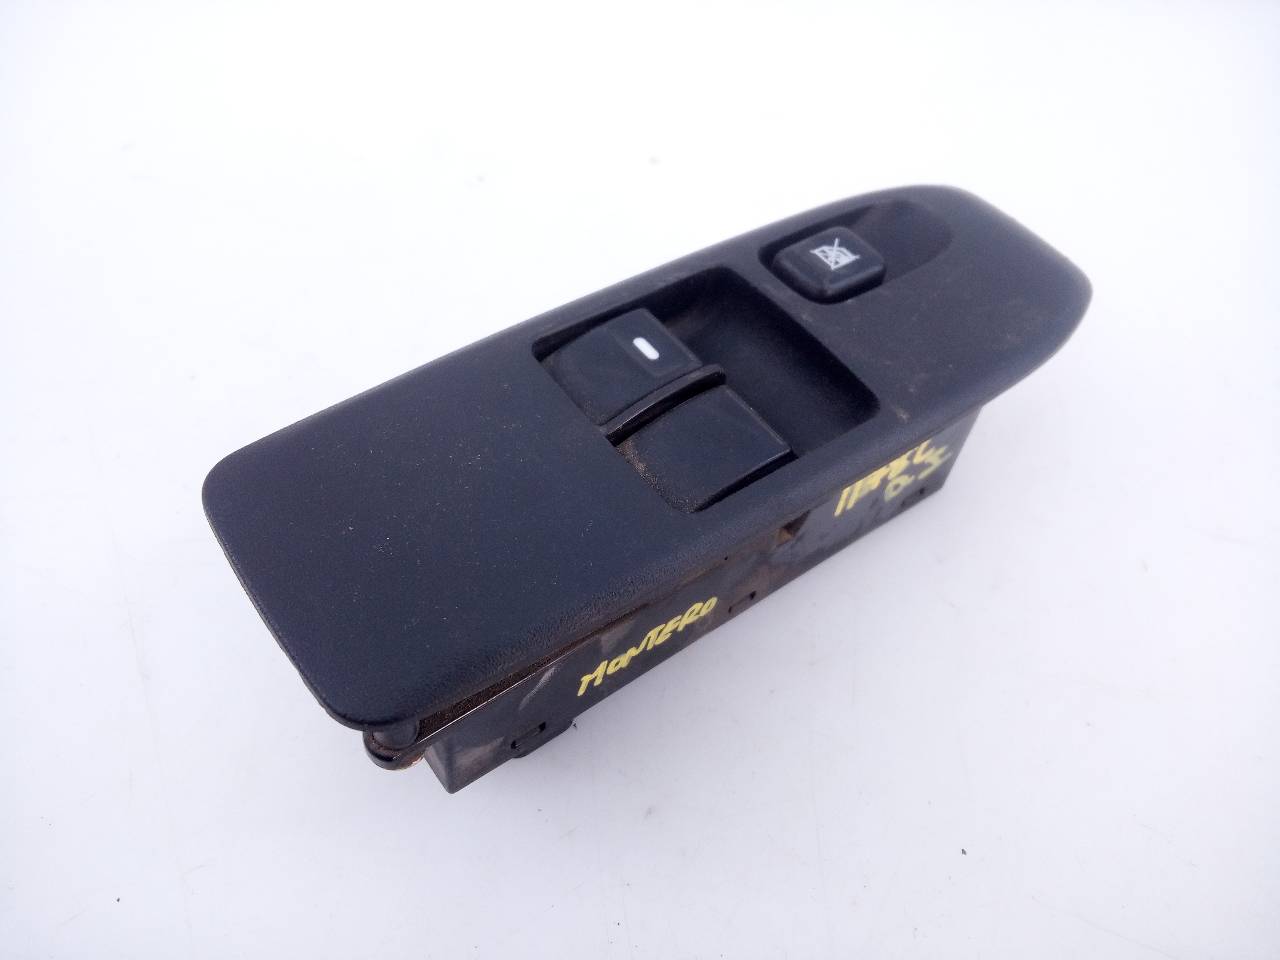 MITSUBISHI Pajero 3 generation (1999-2006) Front Left Door Window Switch 8608A004, E3-A2-18-1 23295078